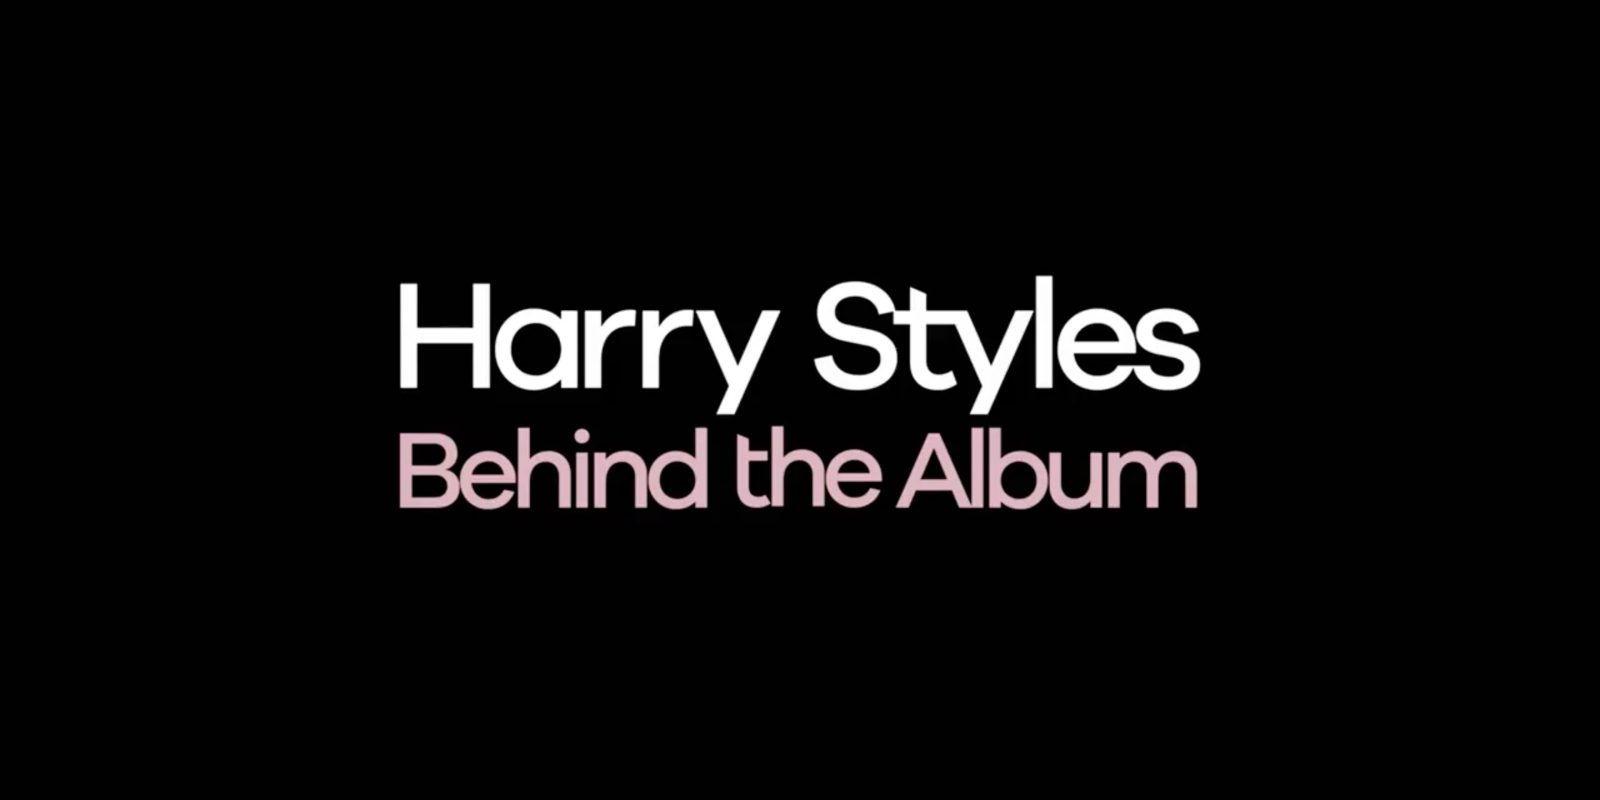 Harry Styles Logo - Exclusive Harry Styles documentary coming to Apple Music May 15th